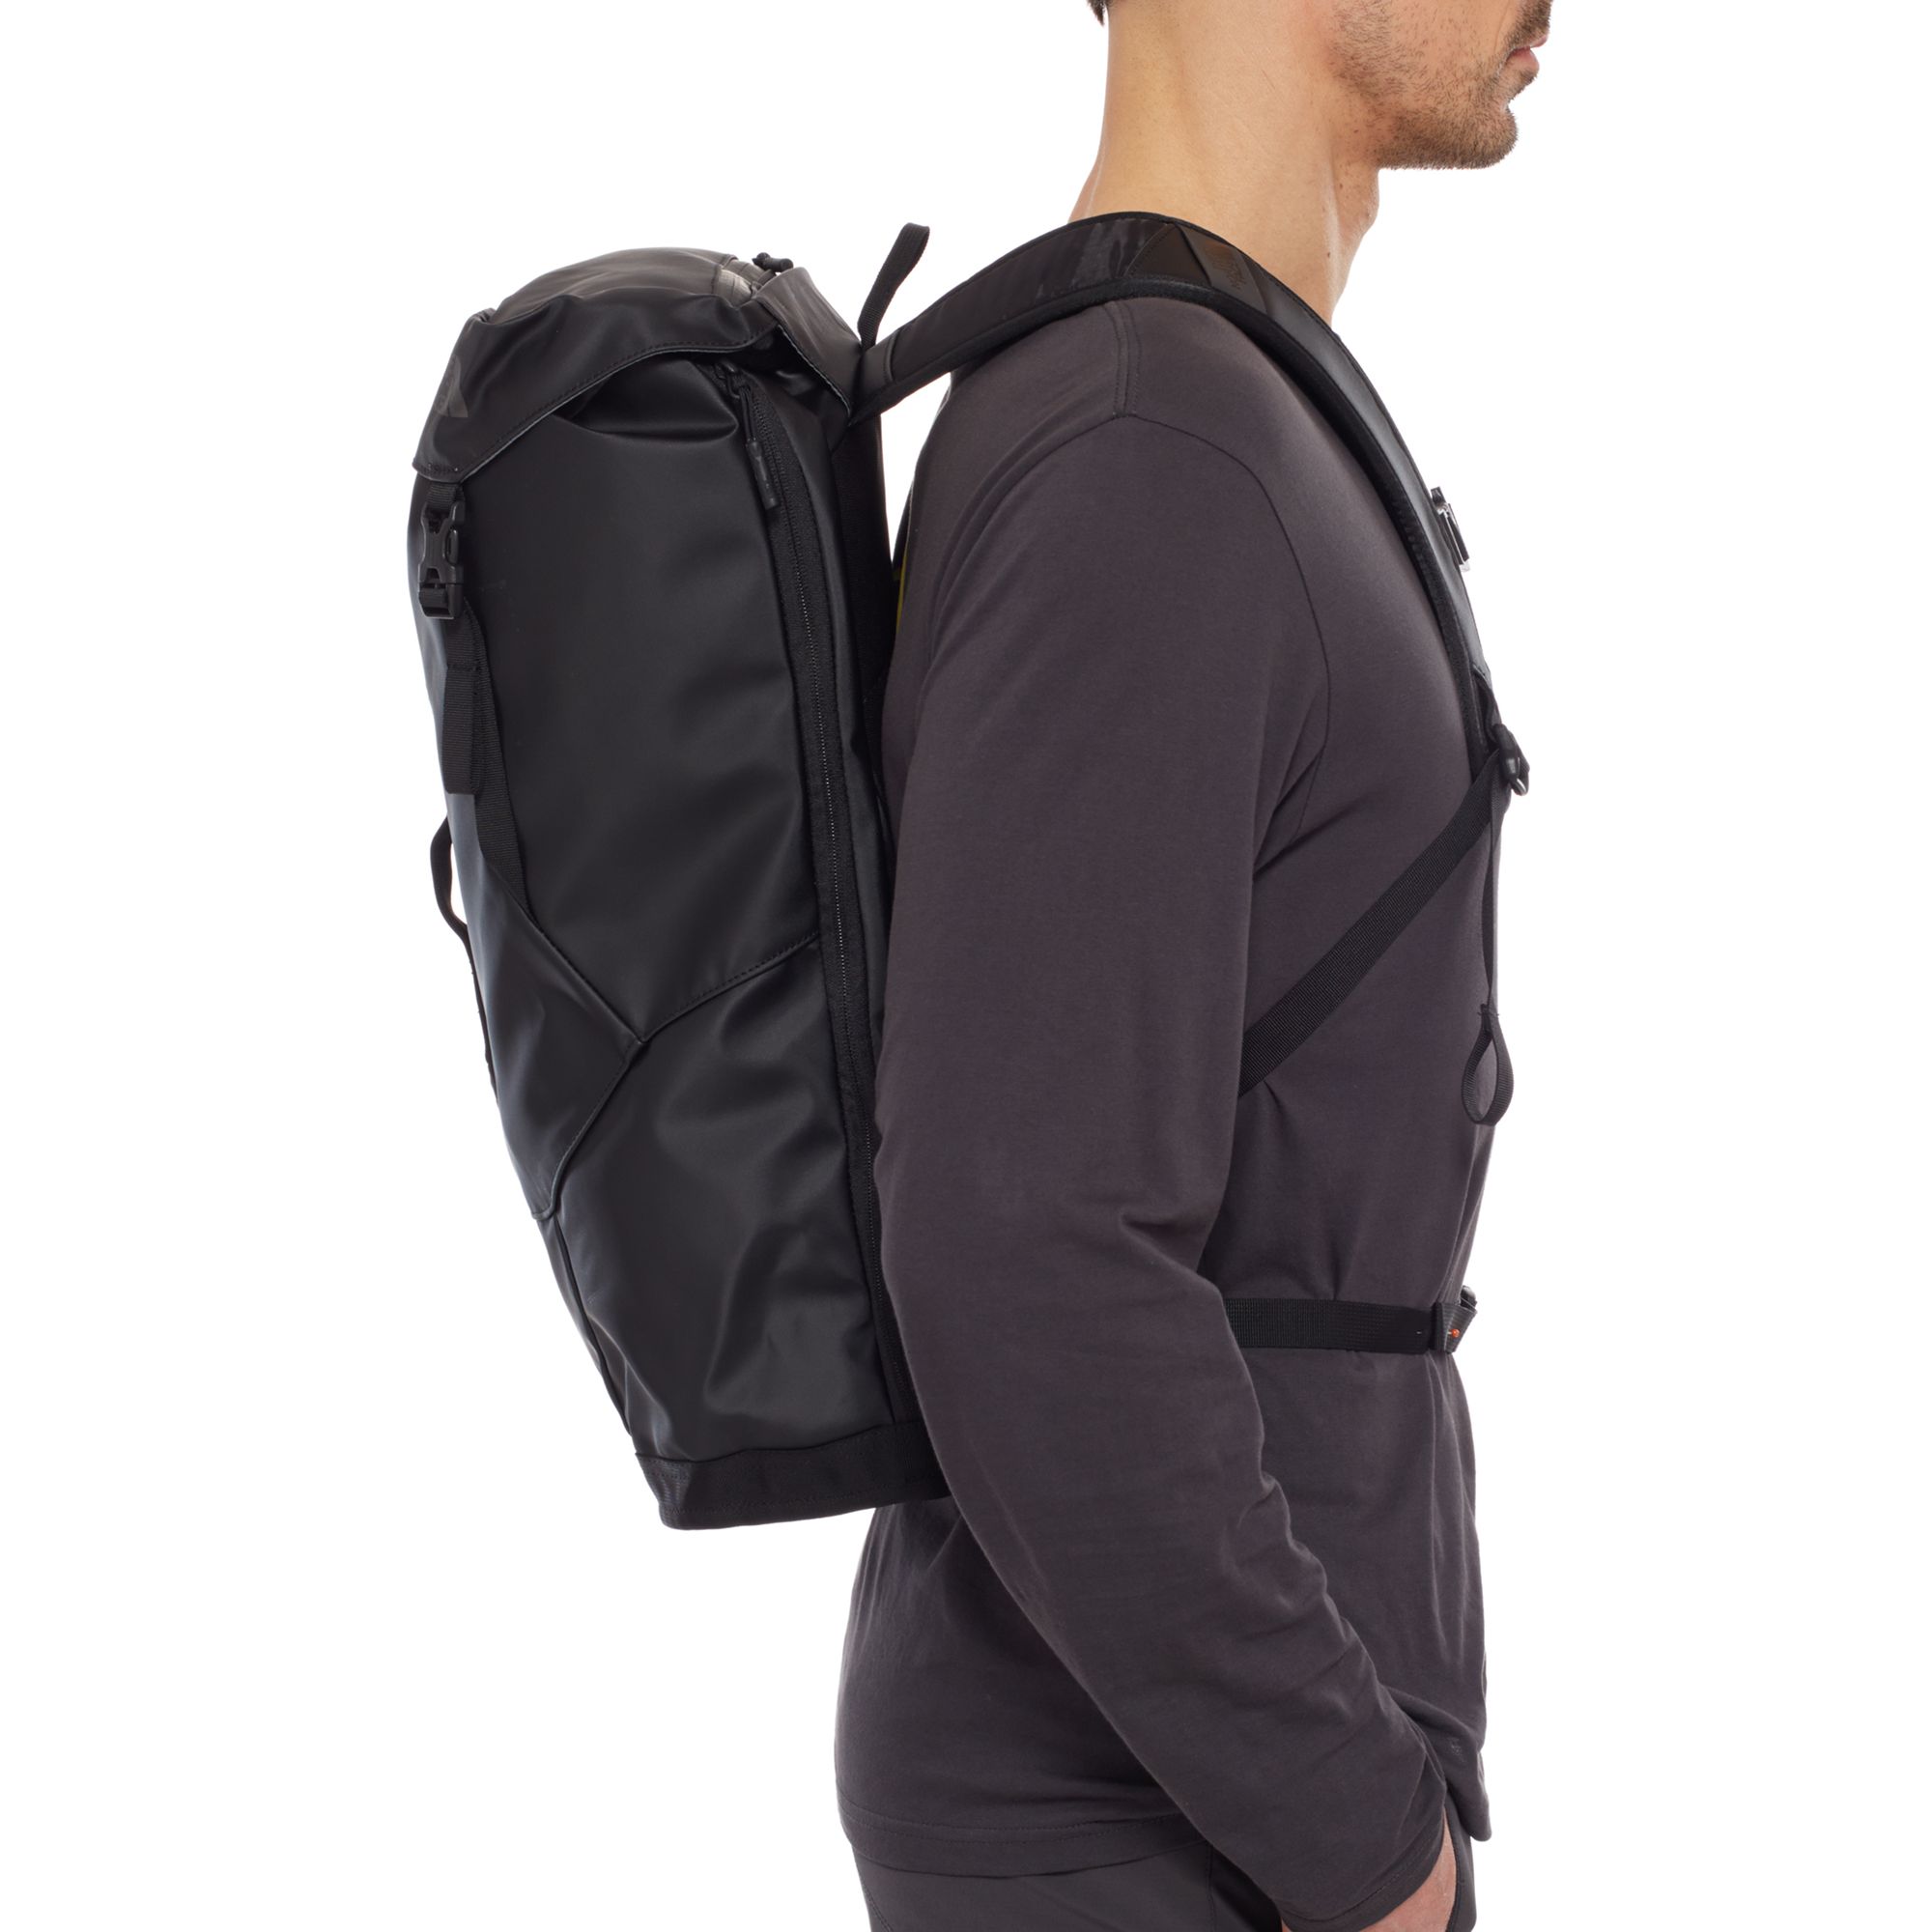 The North Face Base Camp Citer 15